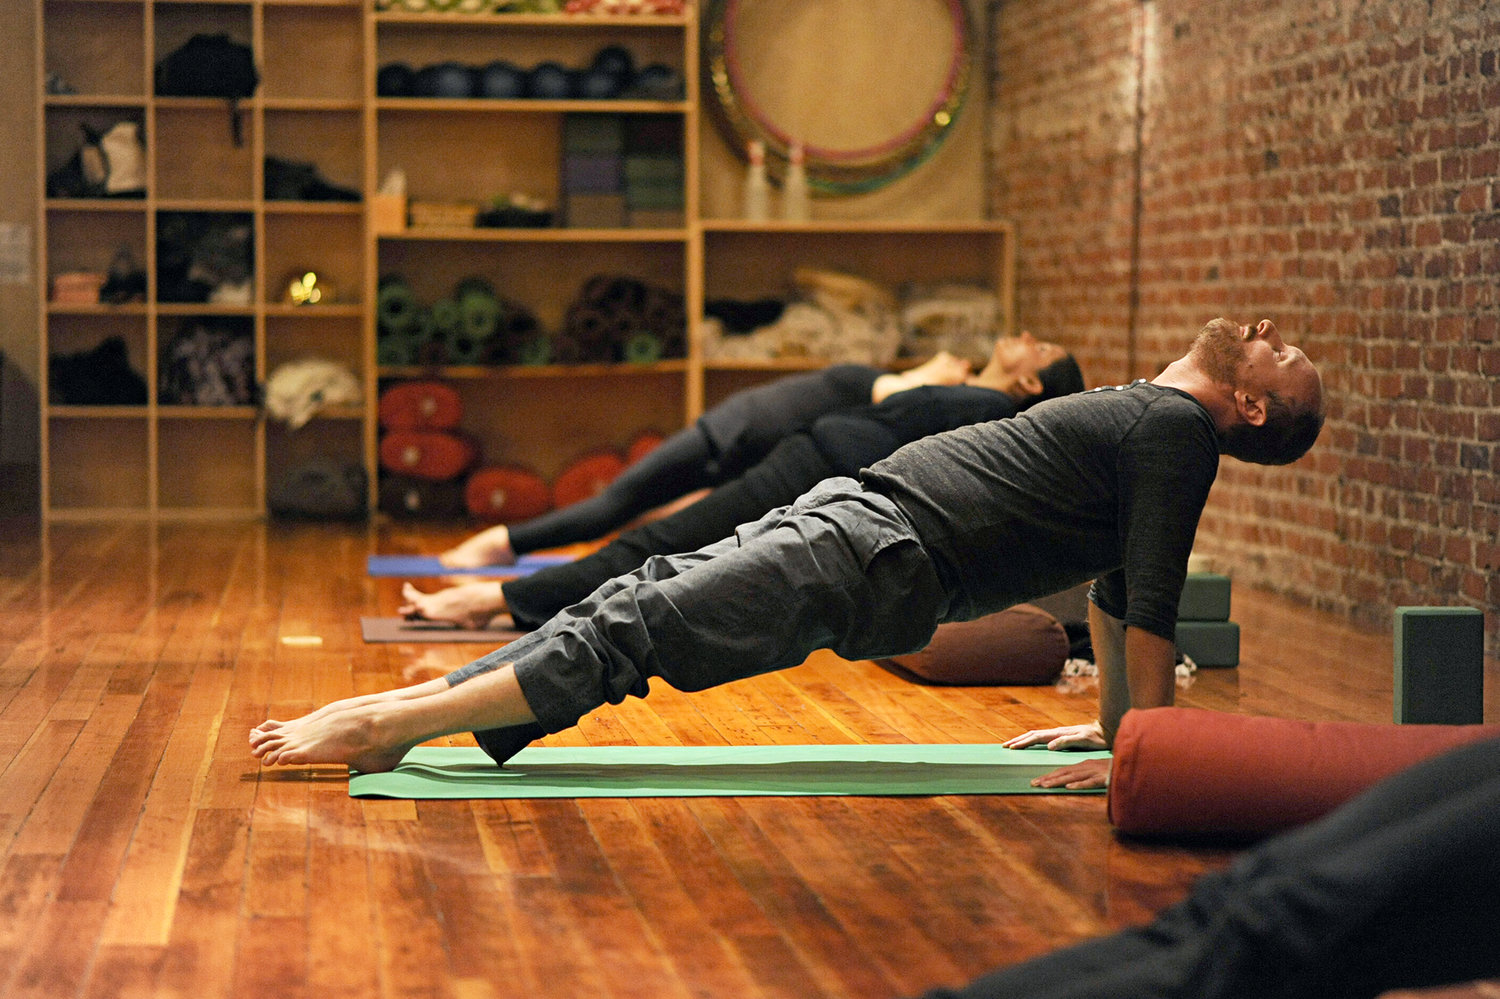 Yoga Class in action at Embody Movement Studio and Boutique in Centralia.